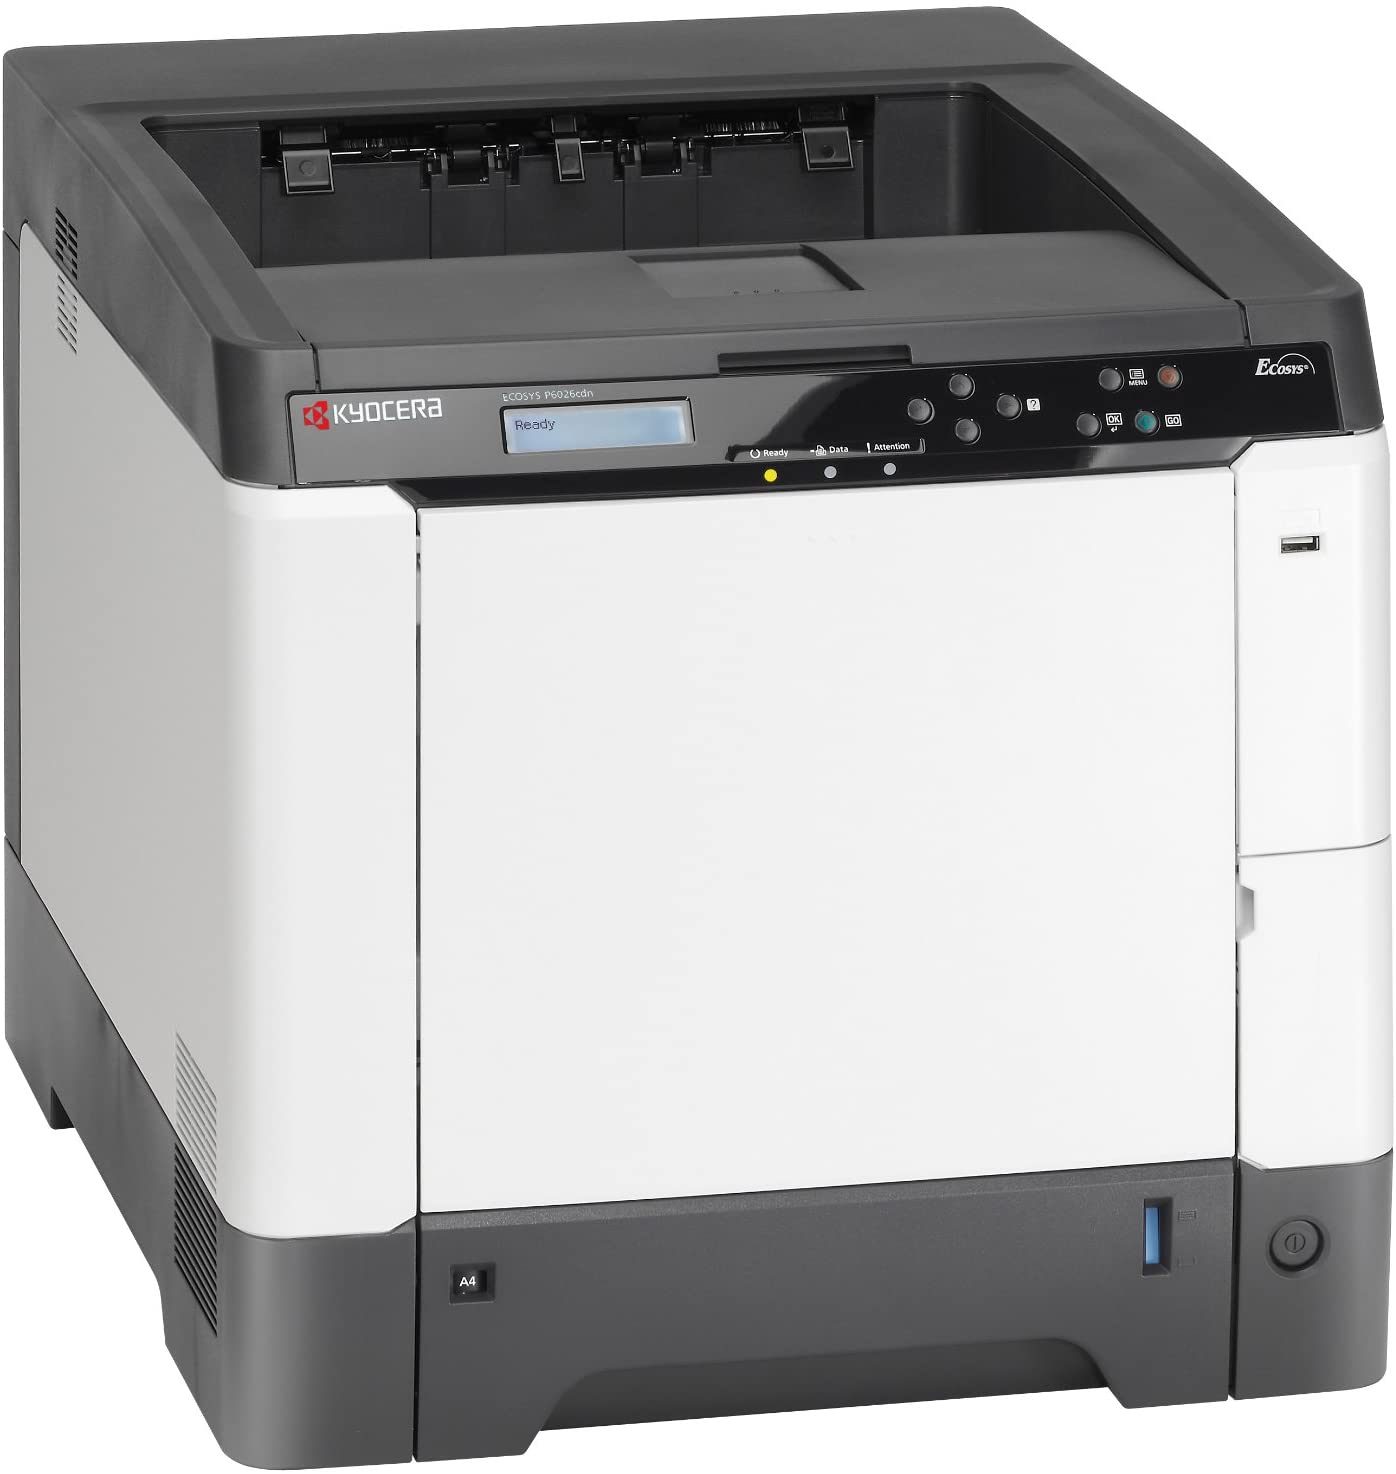 Network Color Laser Printer and automatic duplex